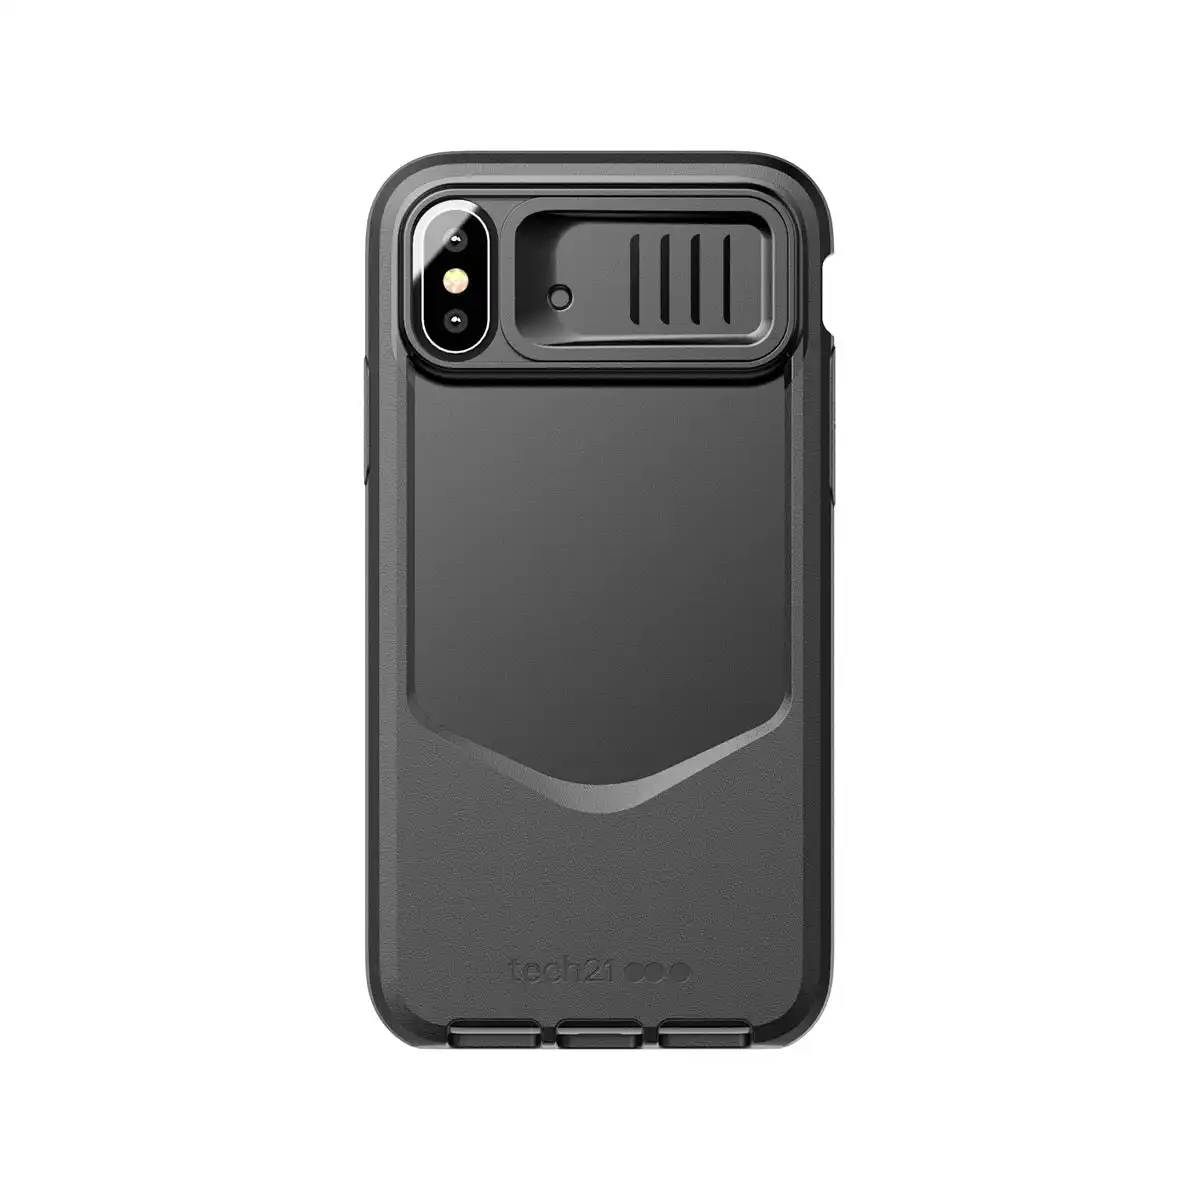 Tech21 Evo Max Phone Case for iPhone Xs - Black